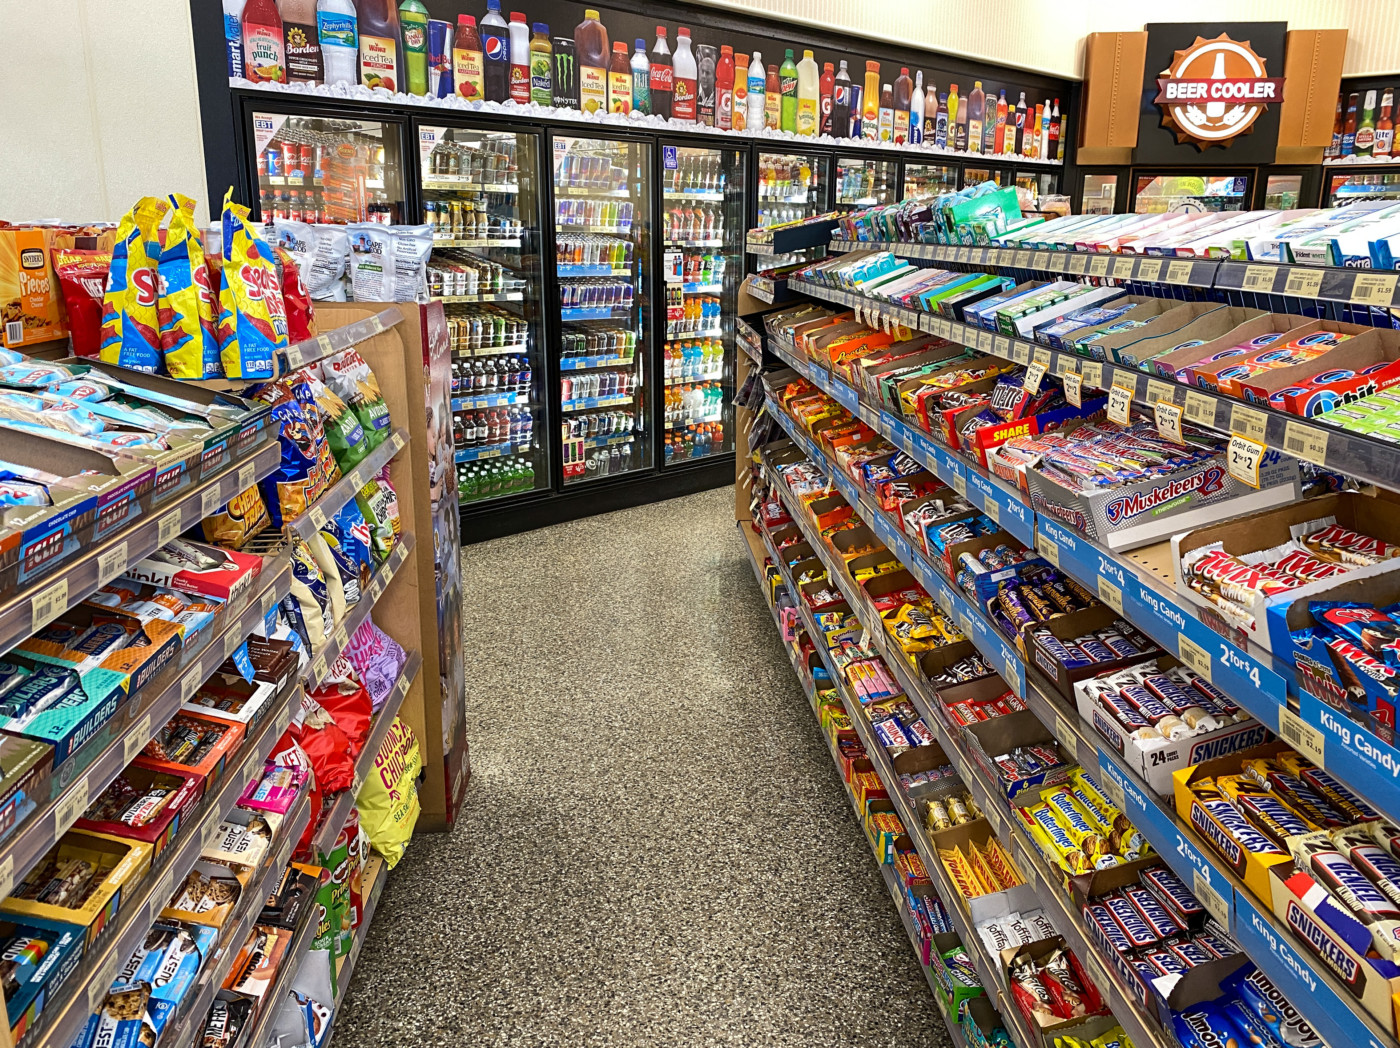 The candy and beverage displays at a Wawa gas station, fast food restaurant, and convenience store.